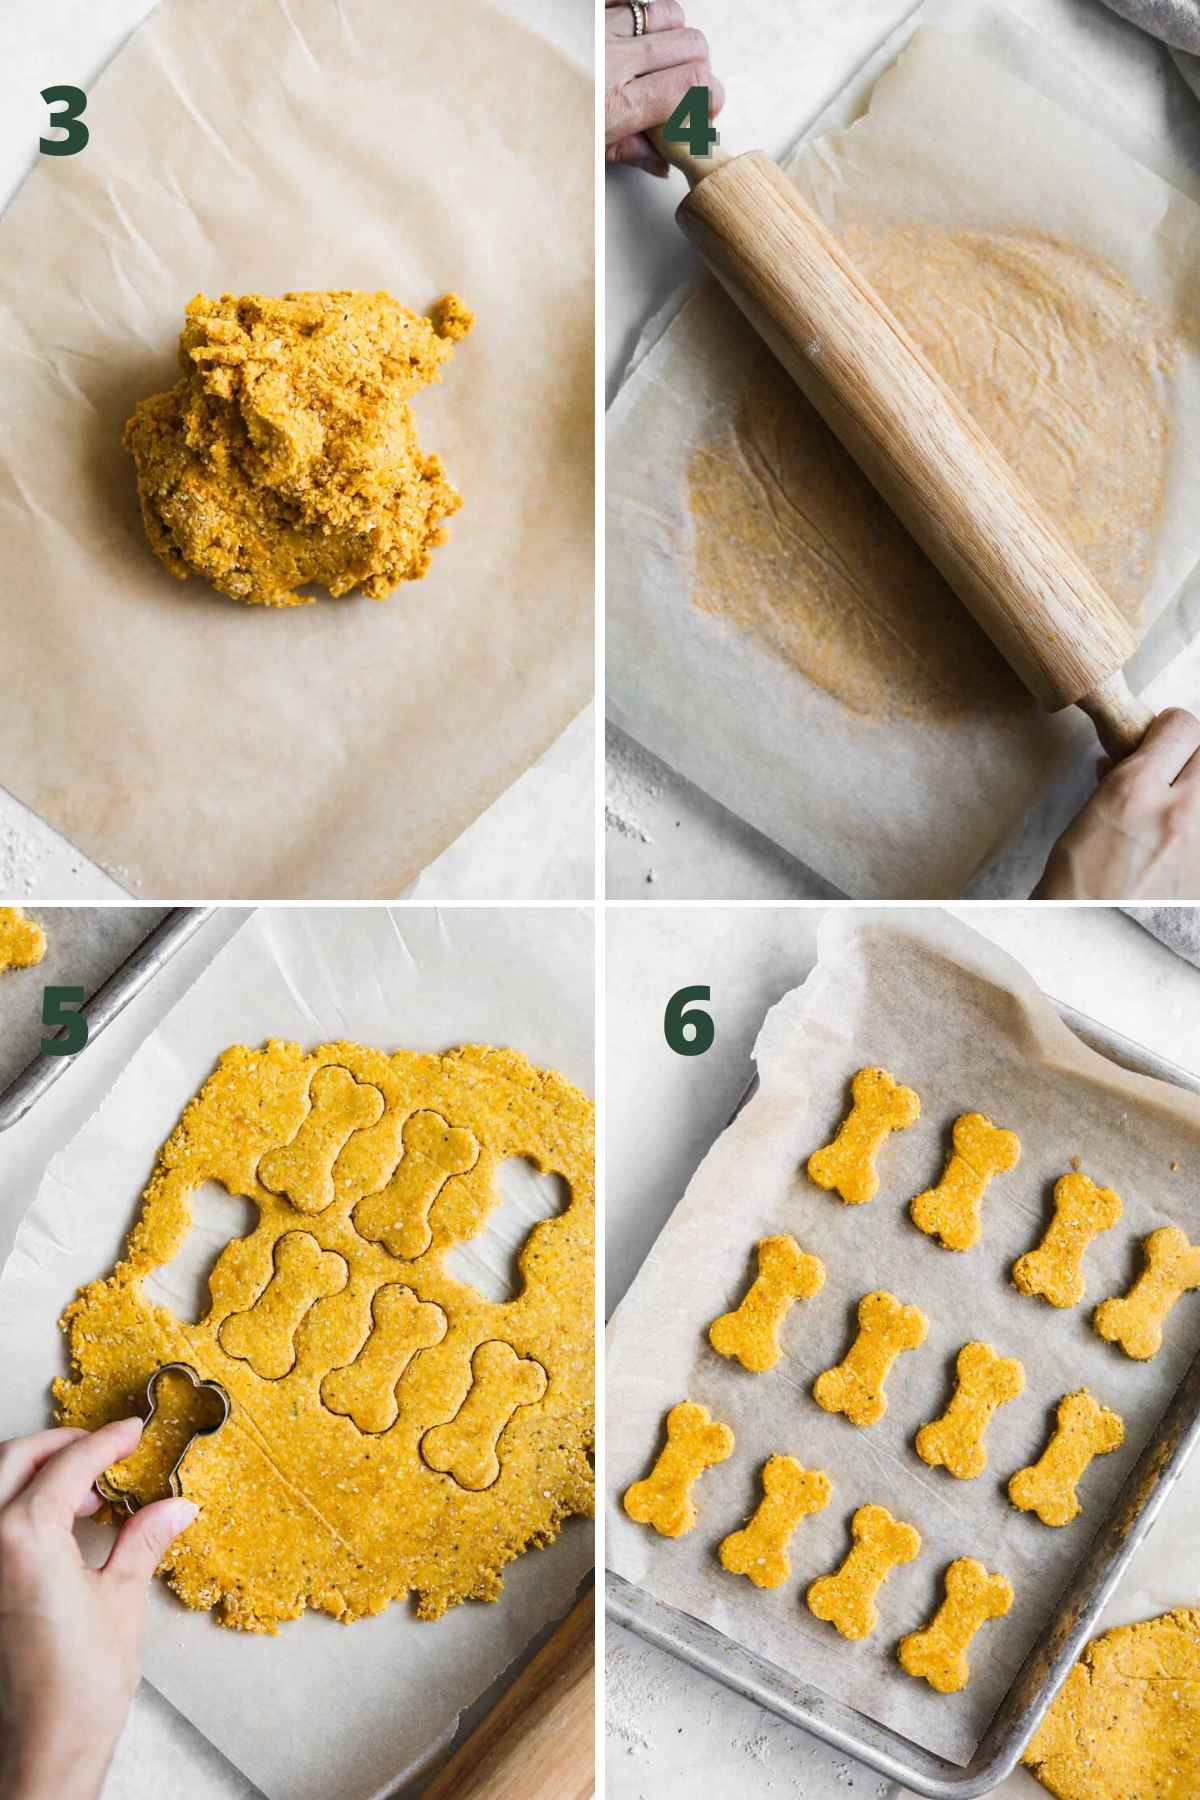 Steps to make homemade dog biscuits; transfer dough to parchment paper, roll out, use bone-shaped cookie cutter to make biscuits, and bake.